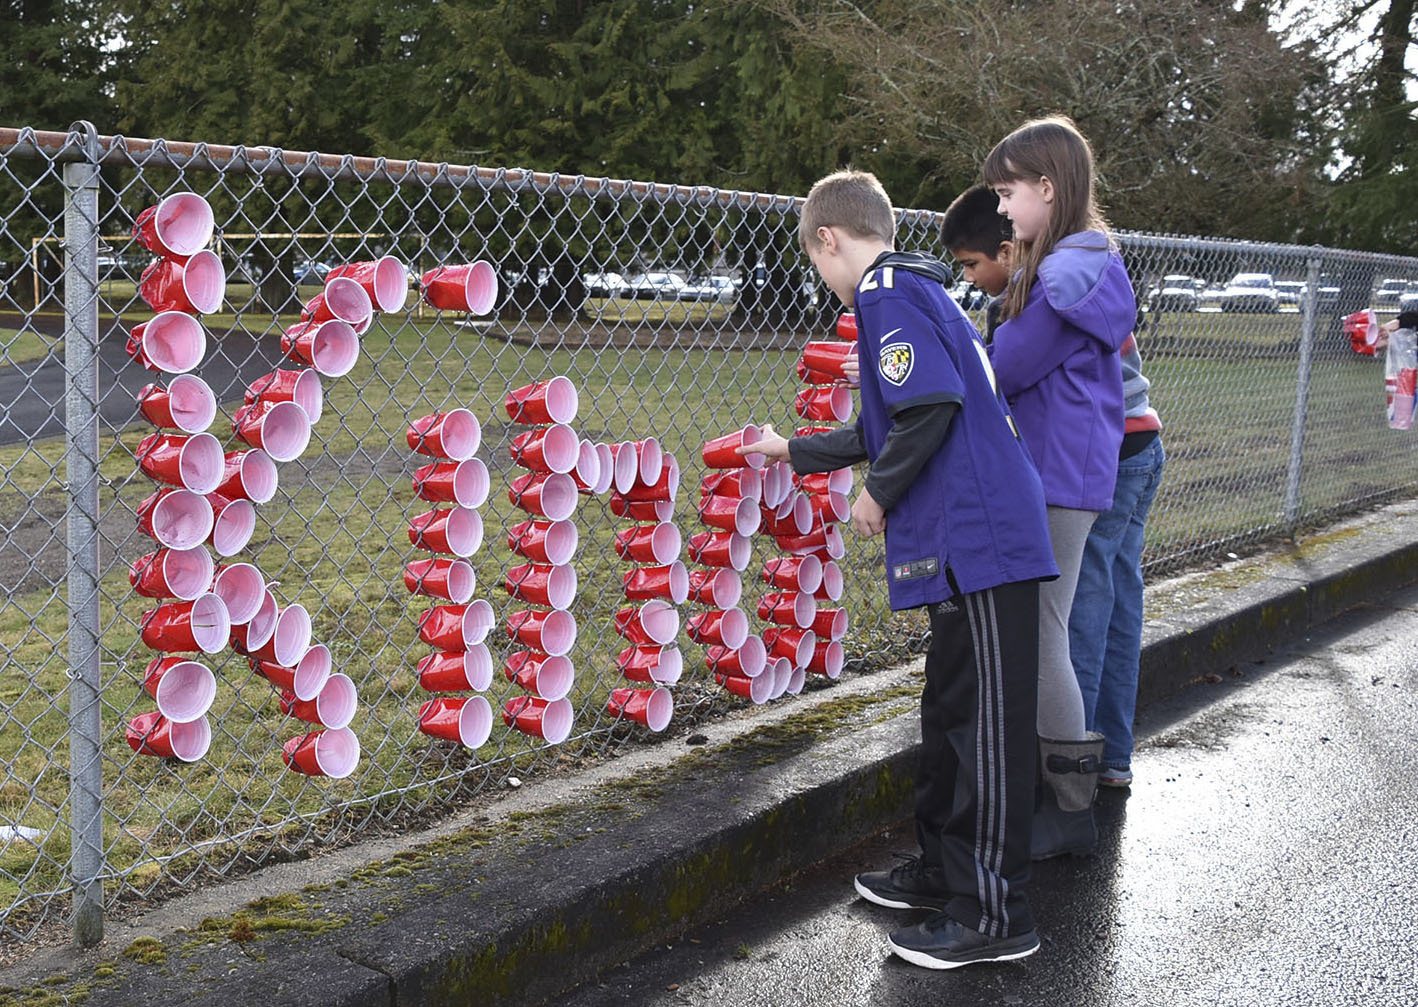 Eagle Creek school’s Great Kindness Challenge urges community to spread kindness